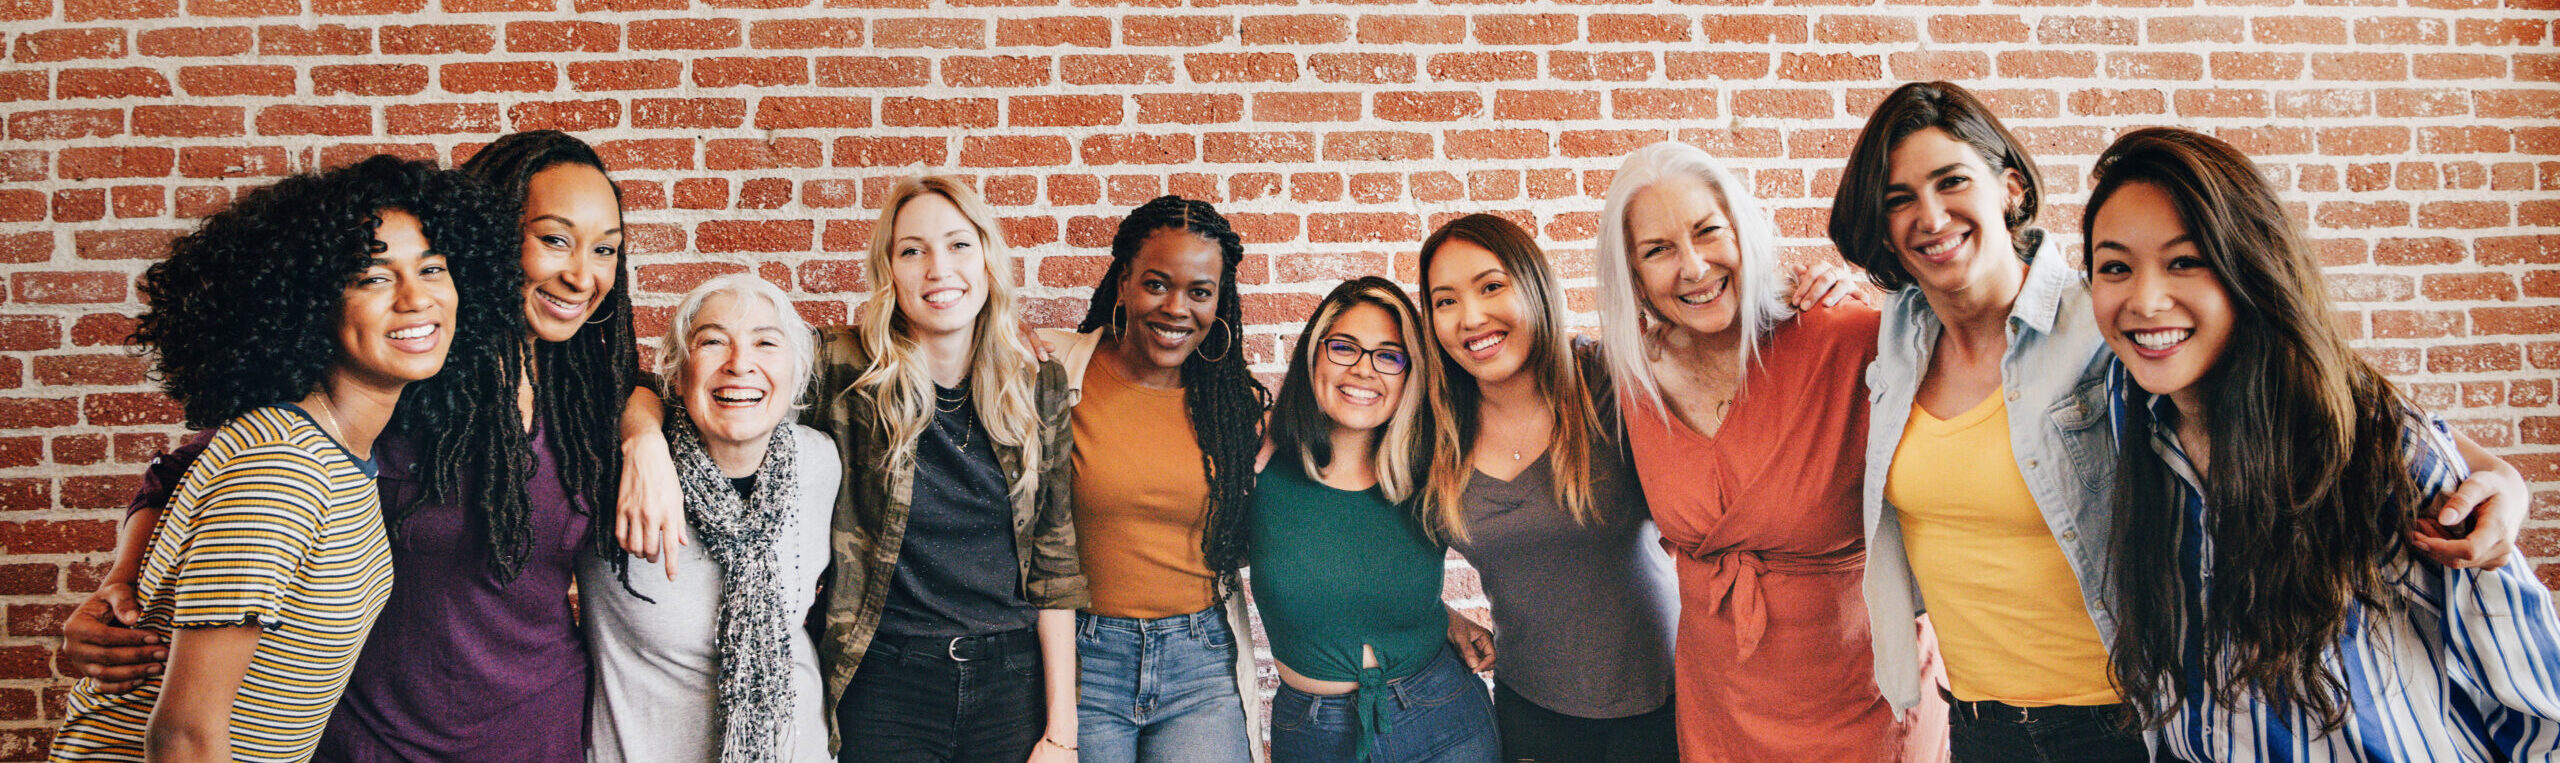 Cheerful diverse women standing in front of a red brick wall